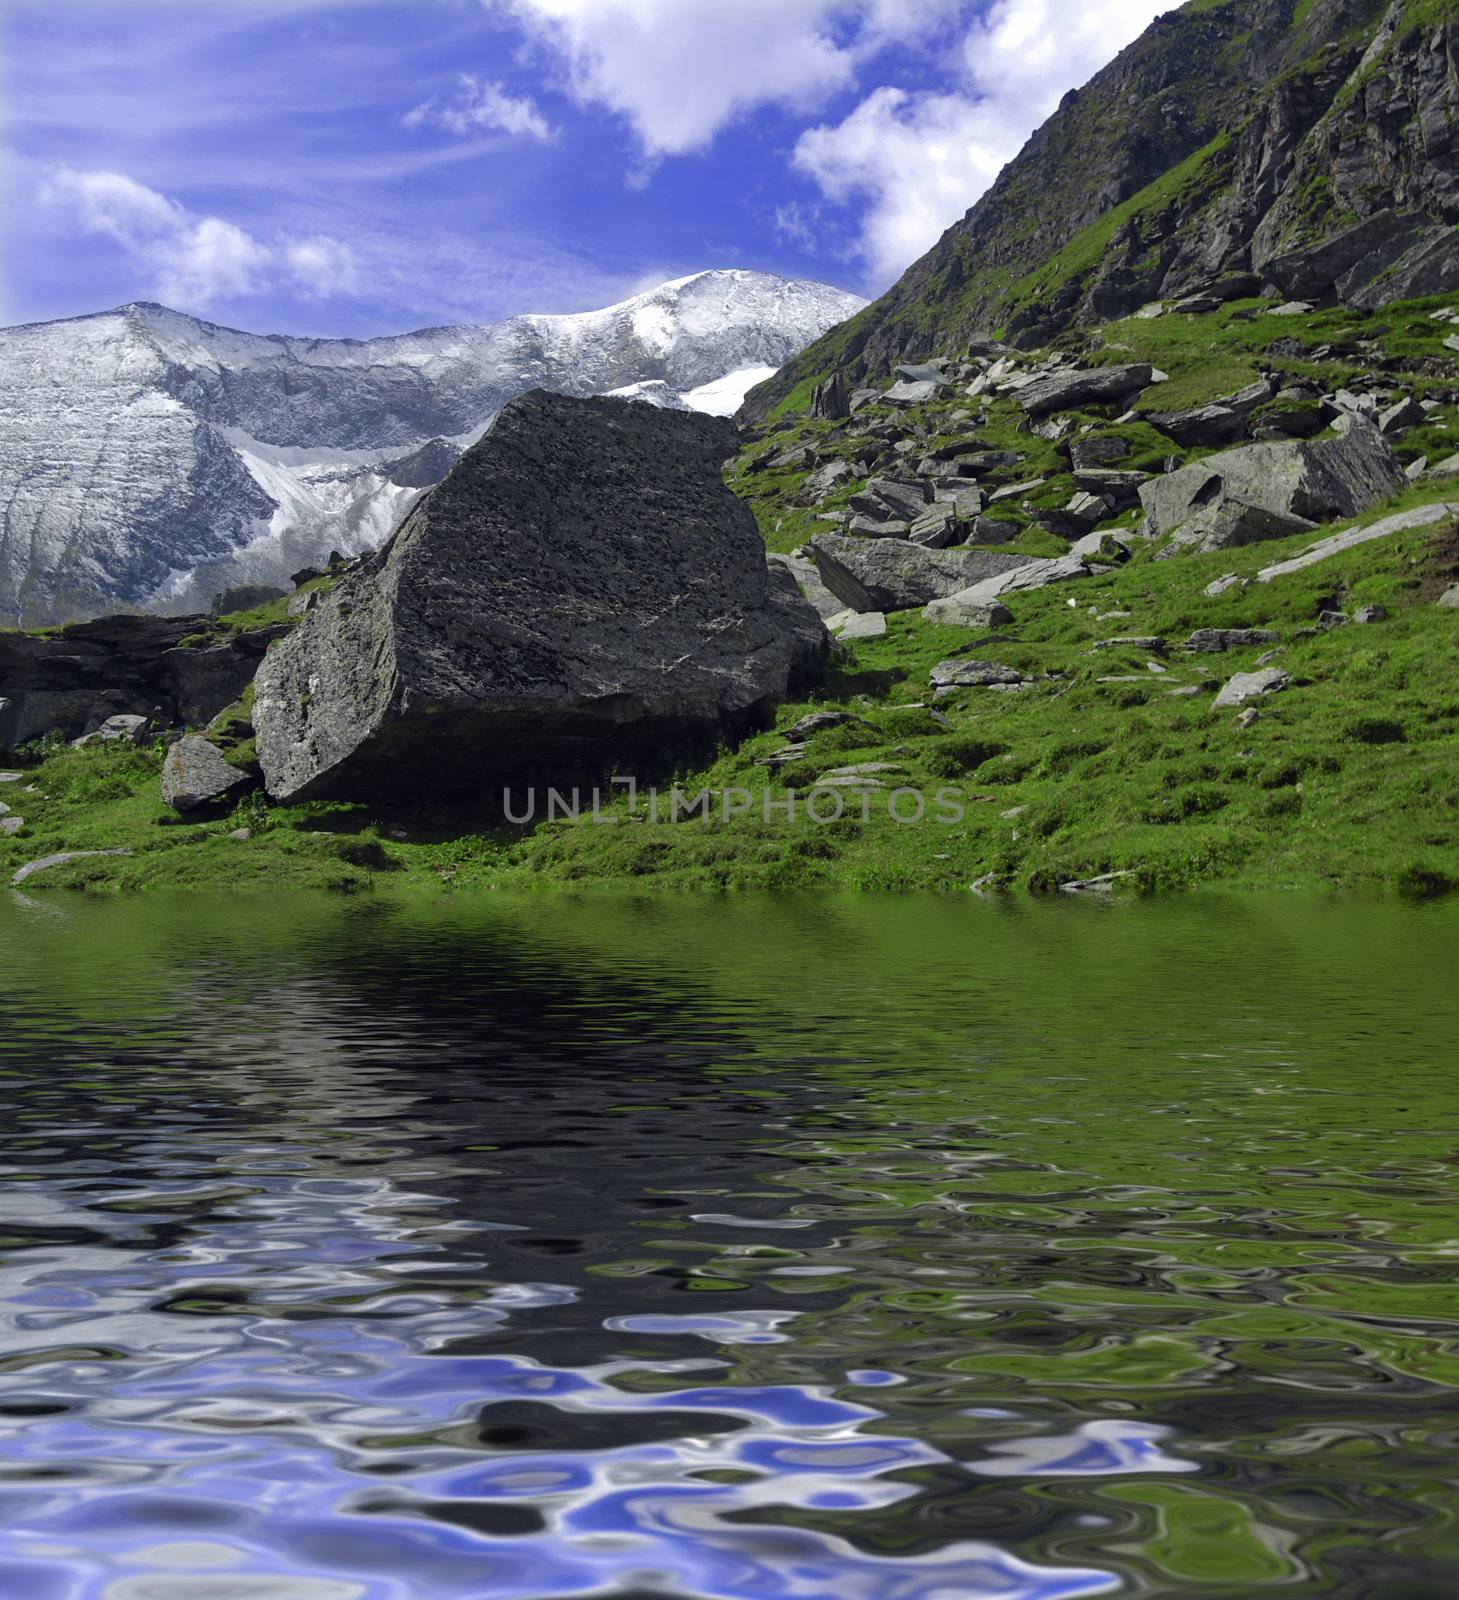 Beautiful Alpine landscape with mountains covered in snow and big boulder  on the grass reflectiong in the lake